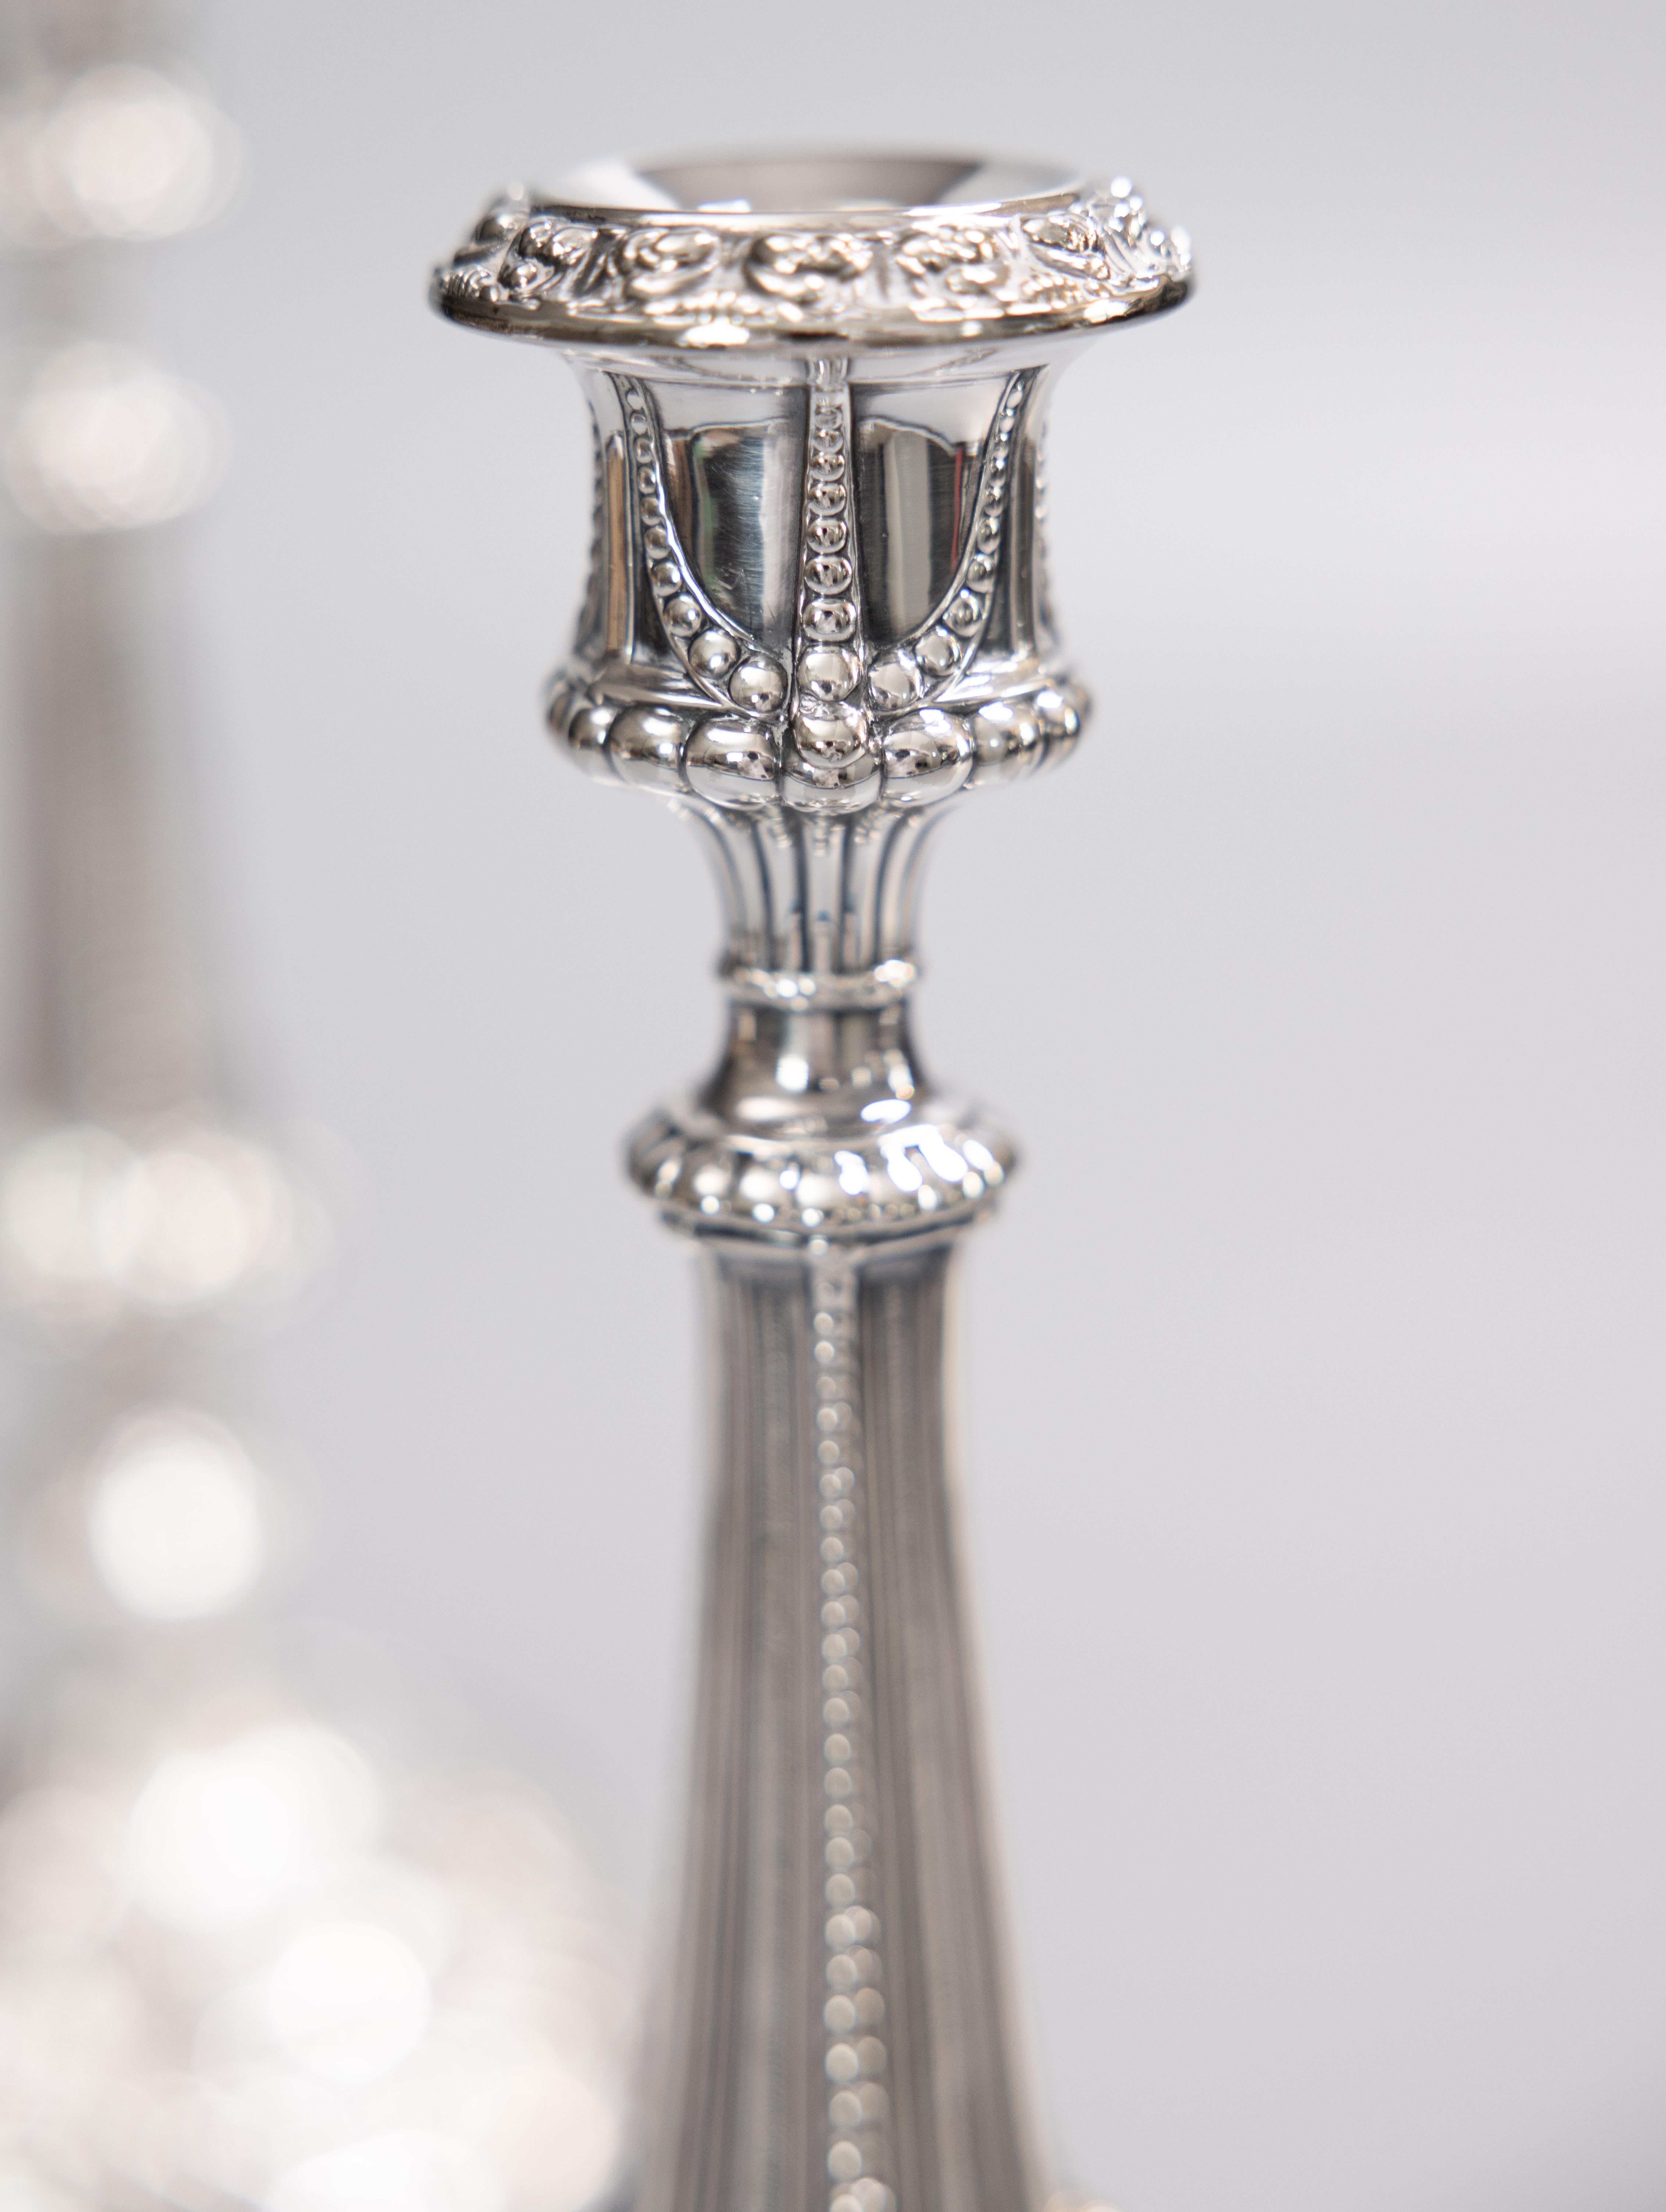 Pair of Antique English Elkington Neoclassical Silver Plate Candlesticks c. 1899 For Sale 3